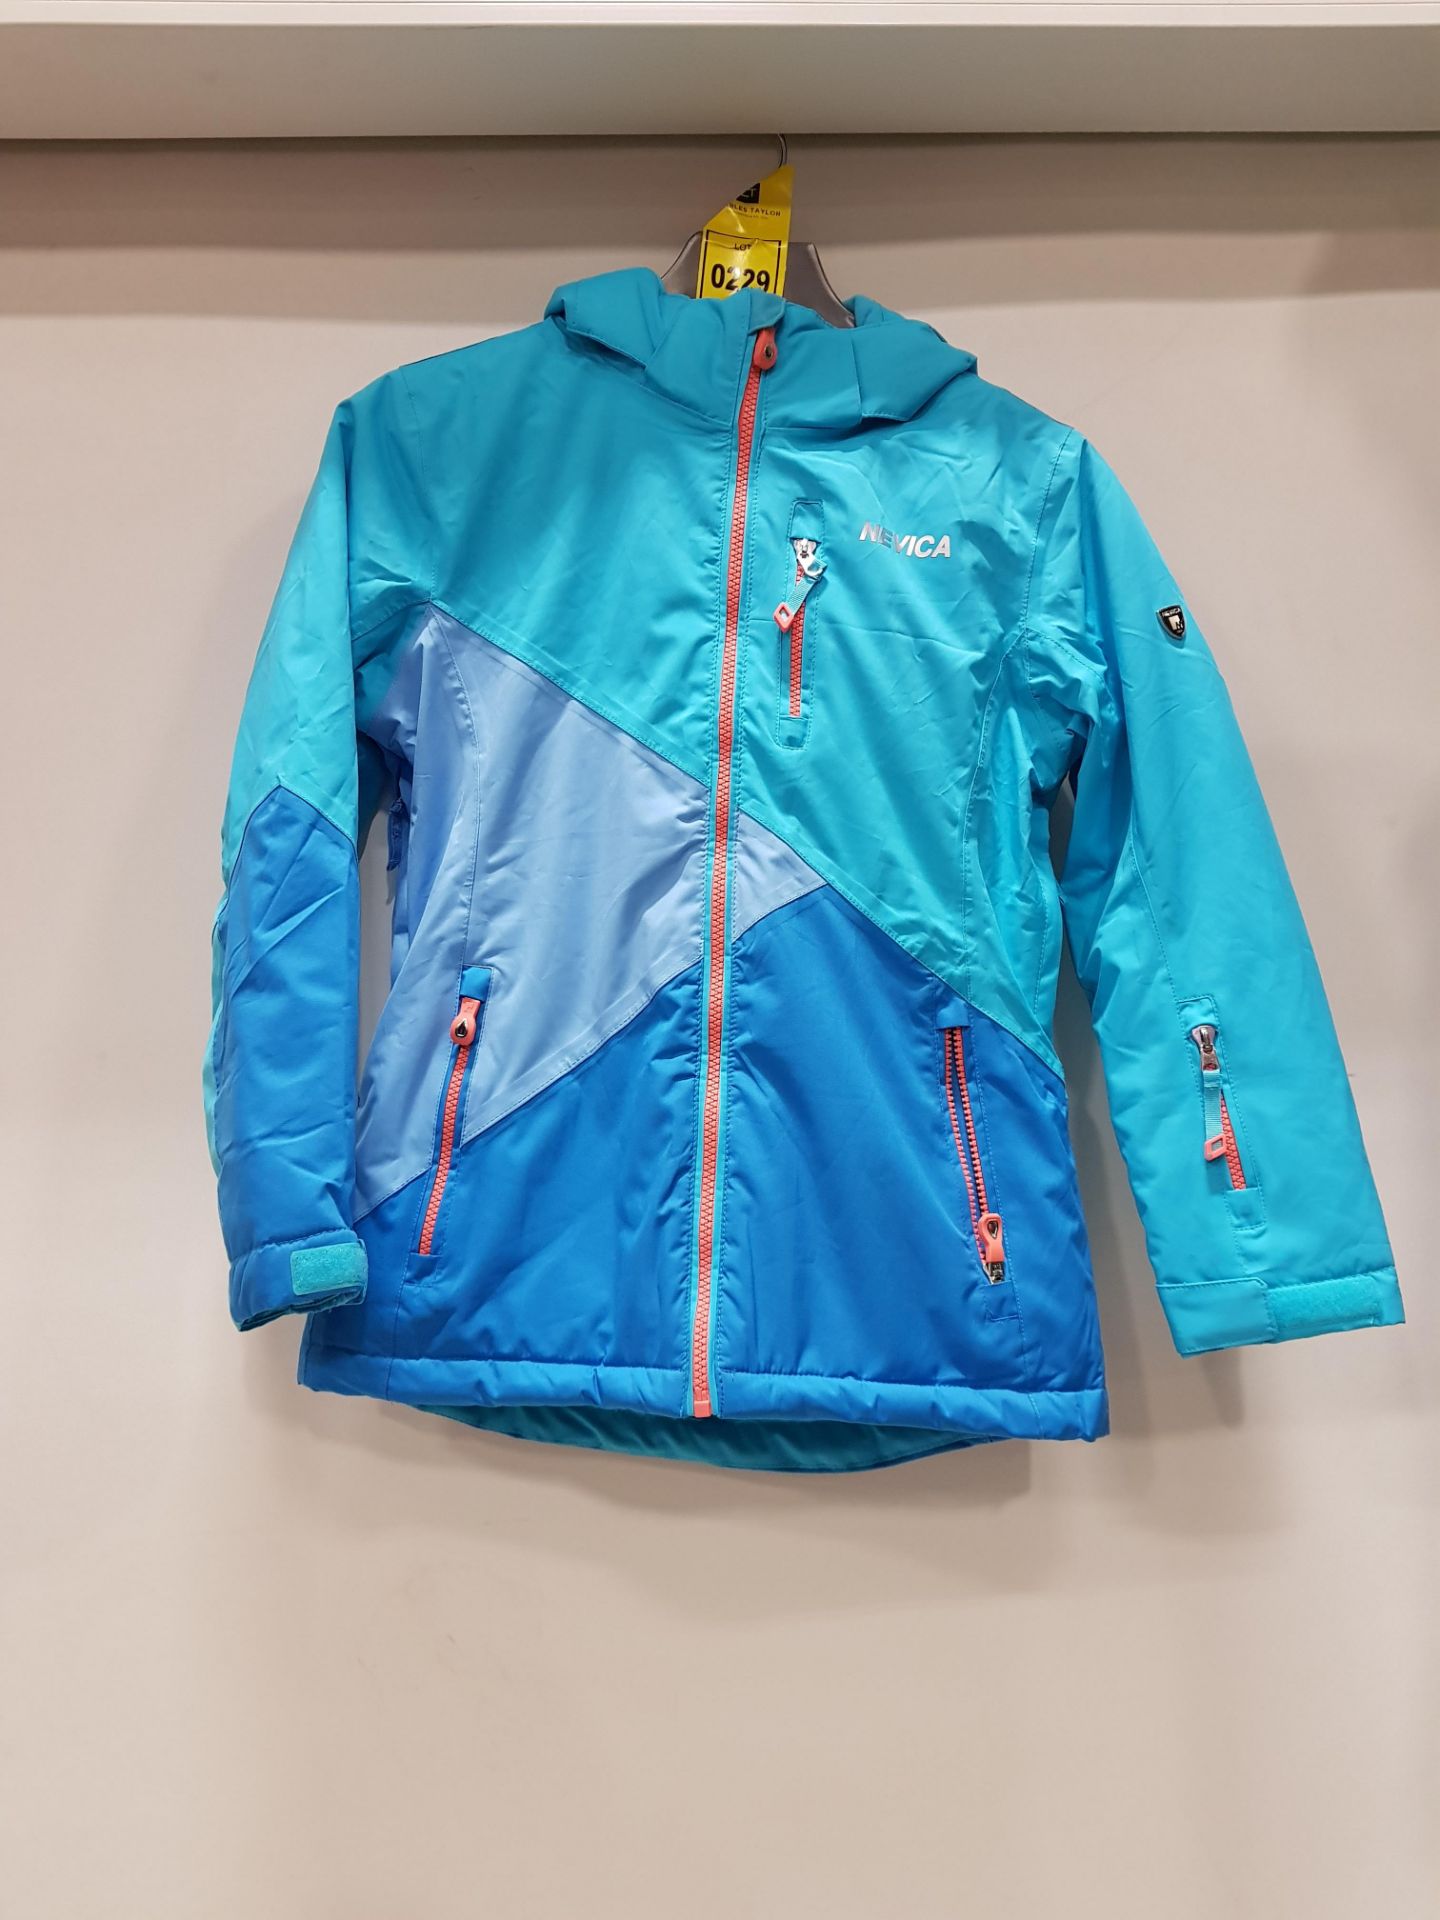 BRAND NEW NEVICA THERMAL SKI JACKET IN TURQUOISE/BLUE/PURPLE ( SIZE UK 9-10 YRS )